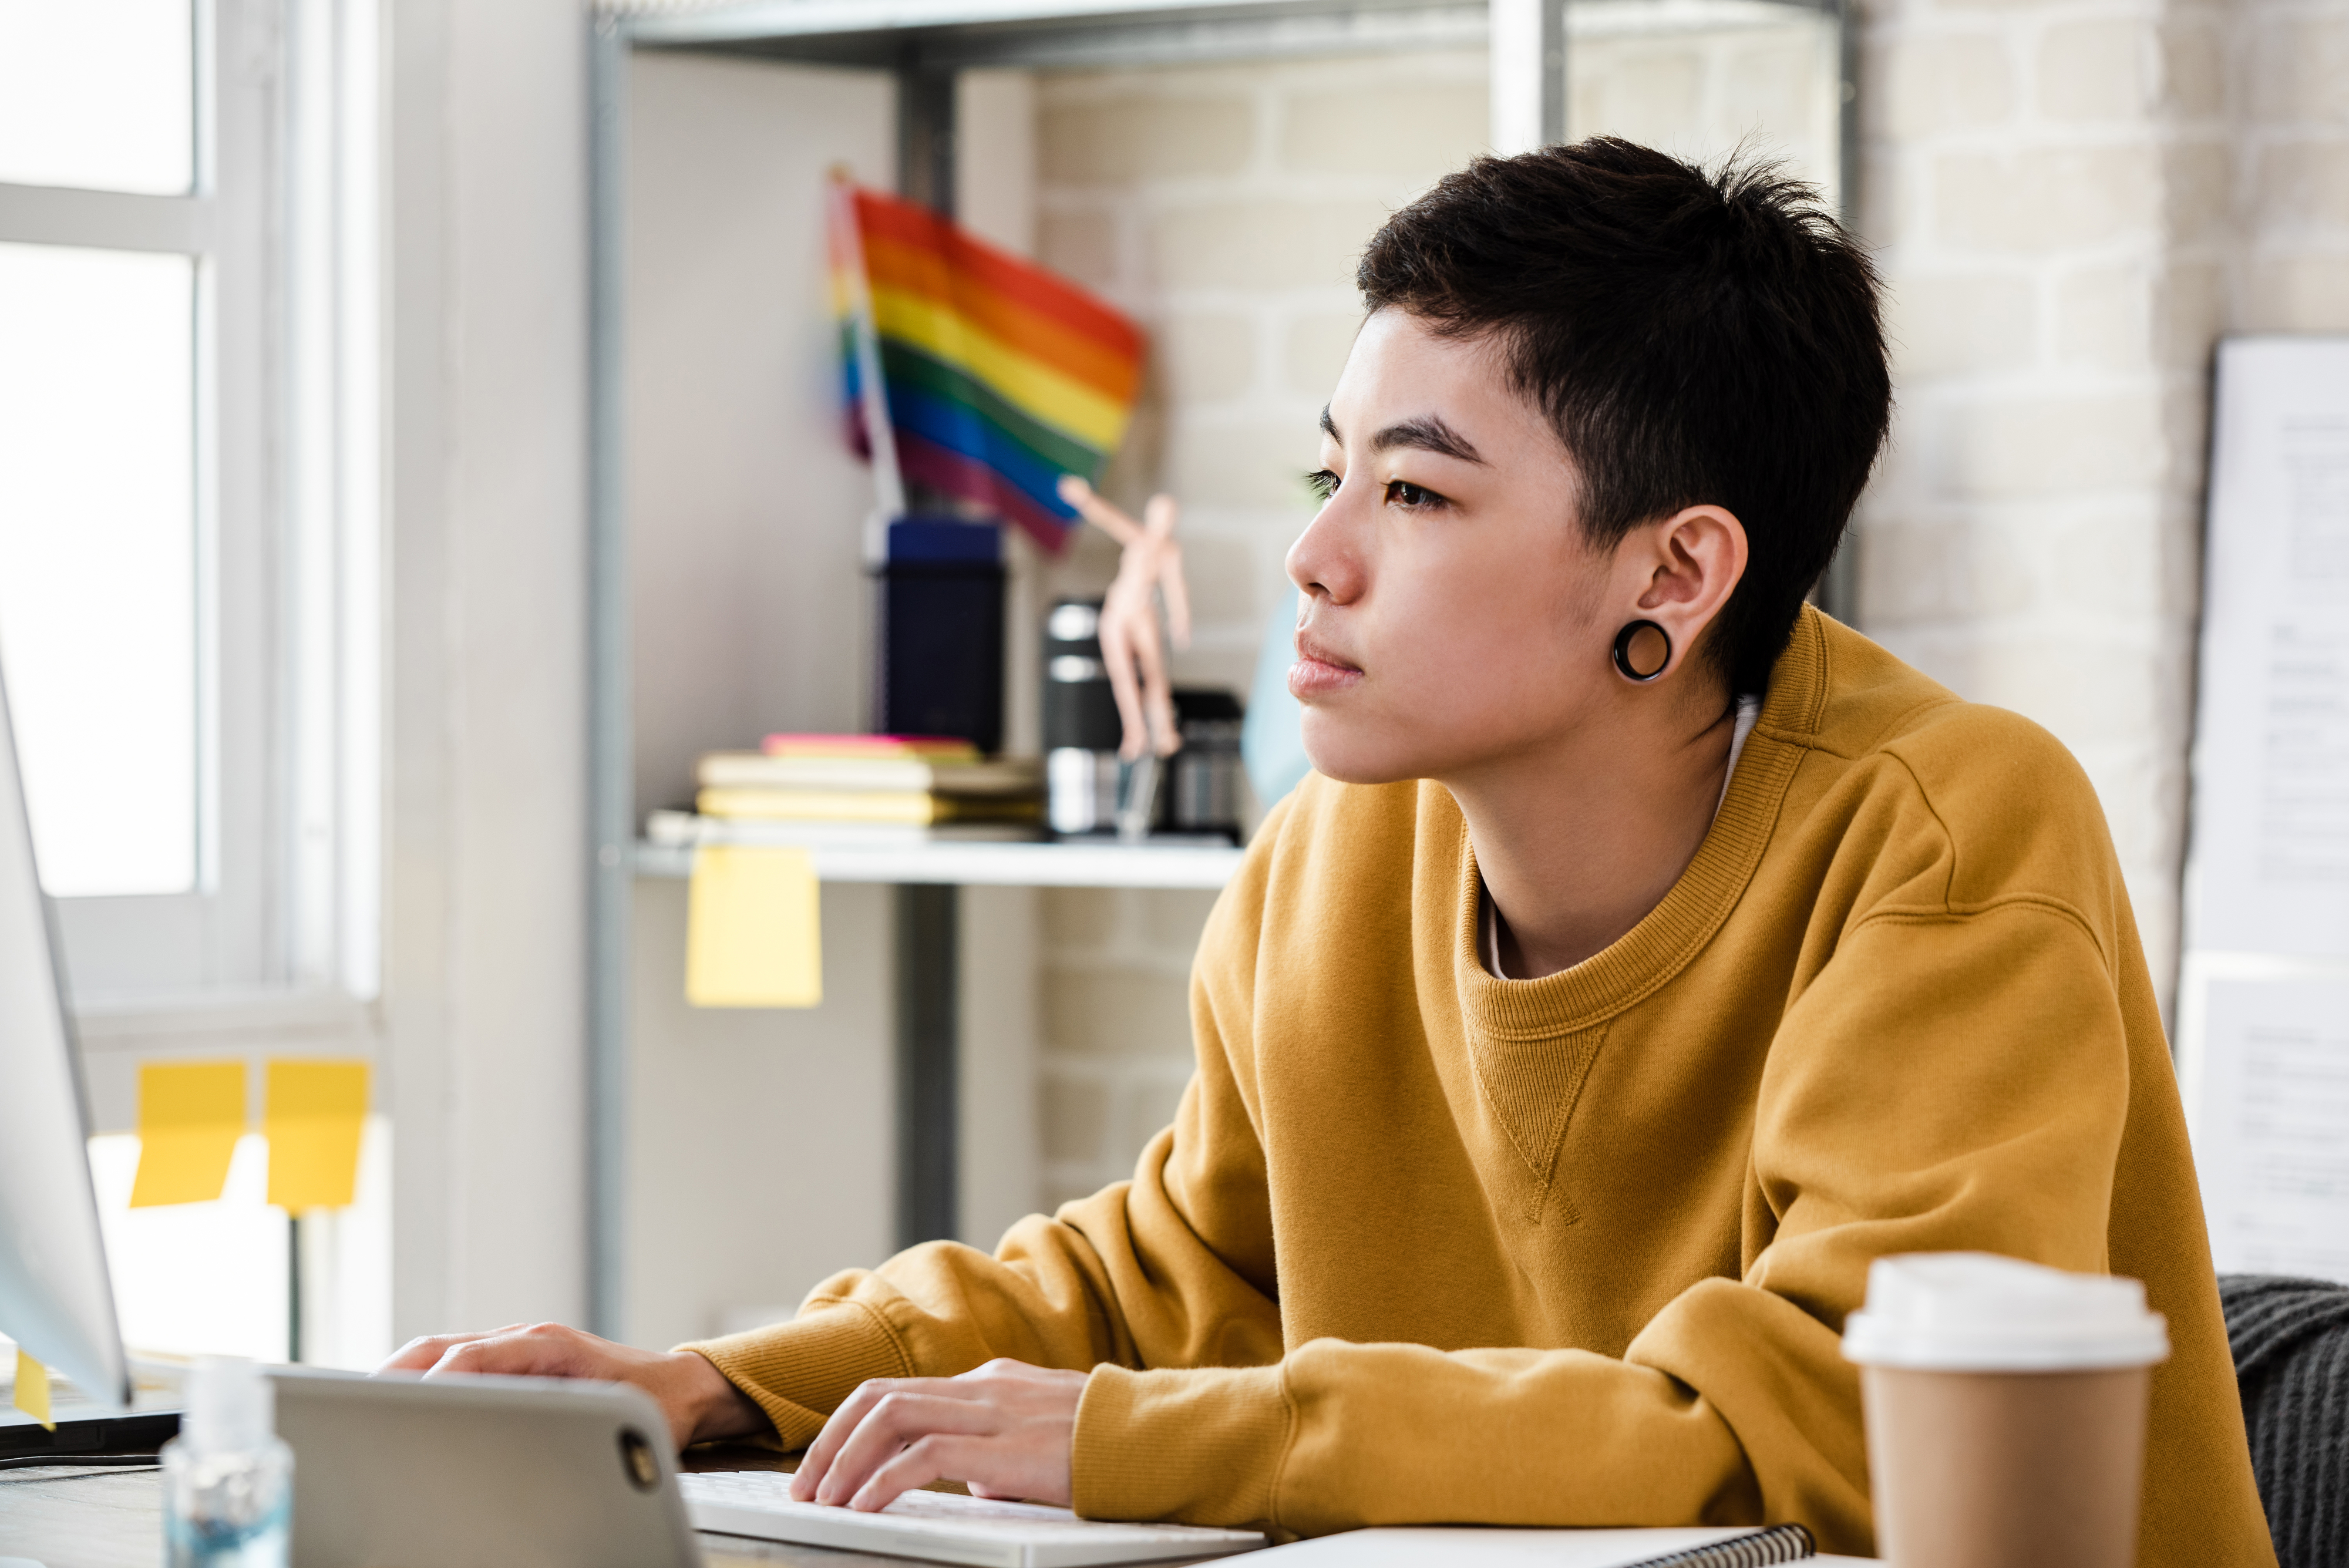 Person in a yellow top working on a computer, with a pride flag in the background